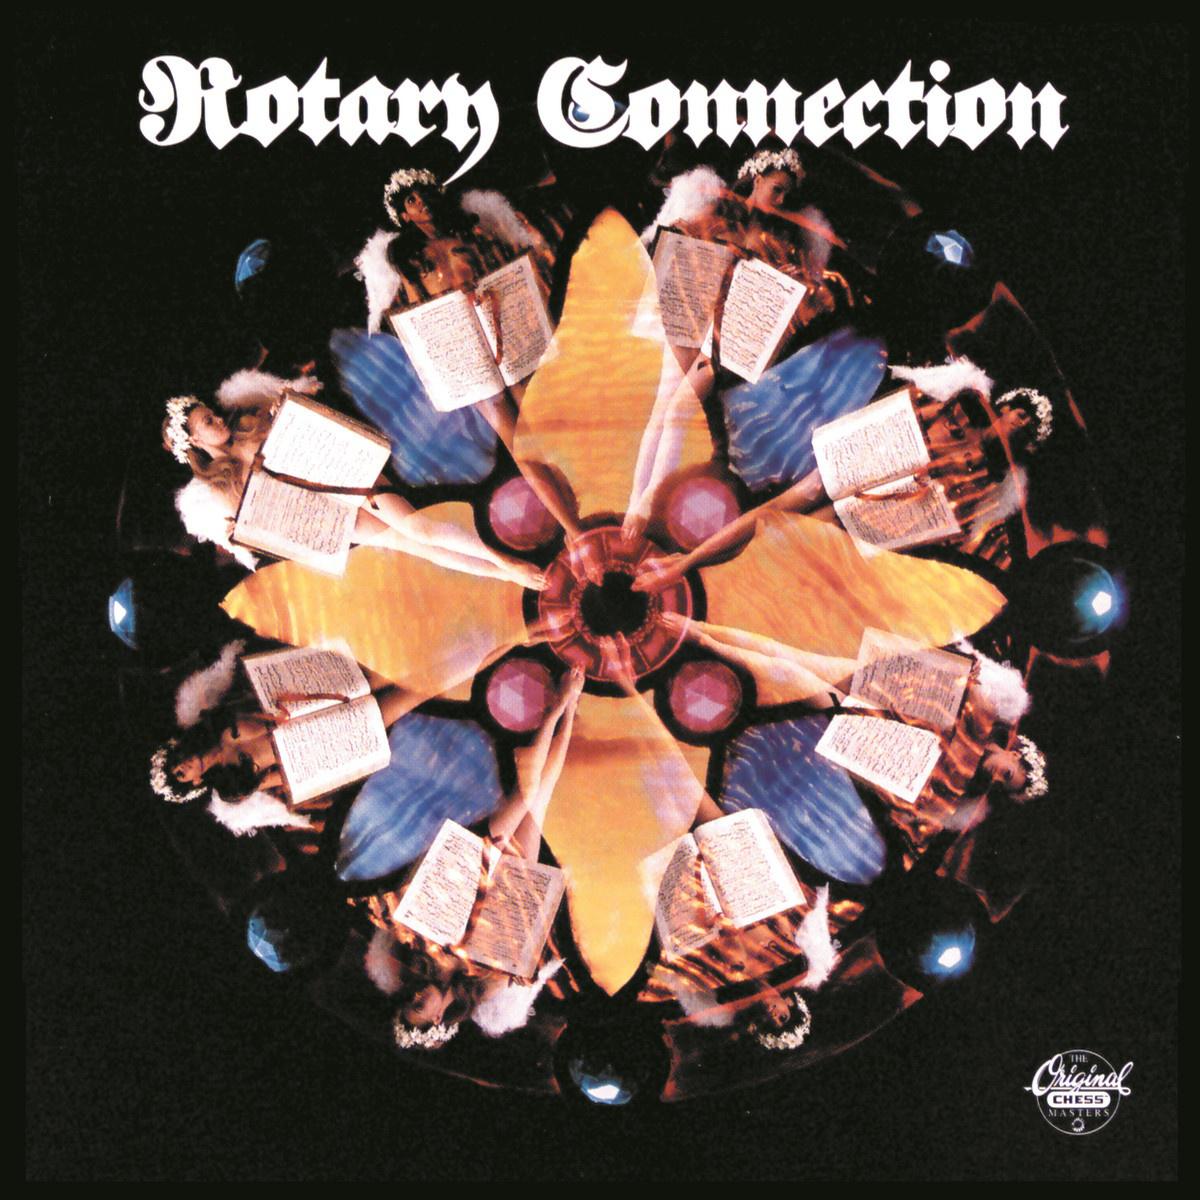 Rotary Connection专辑